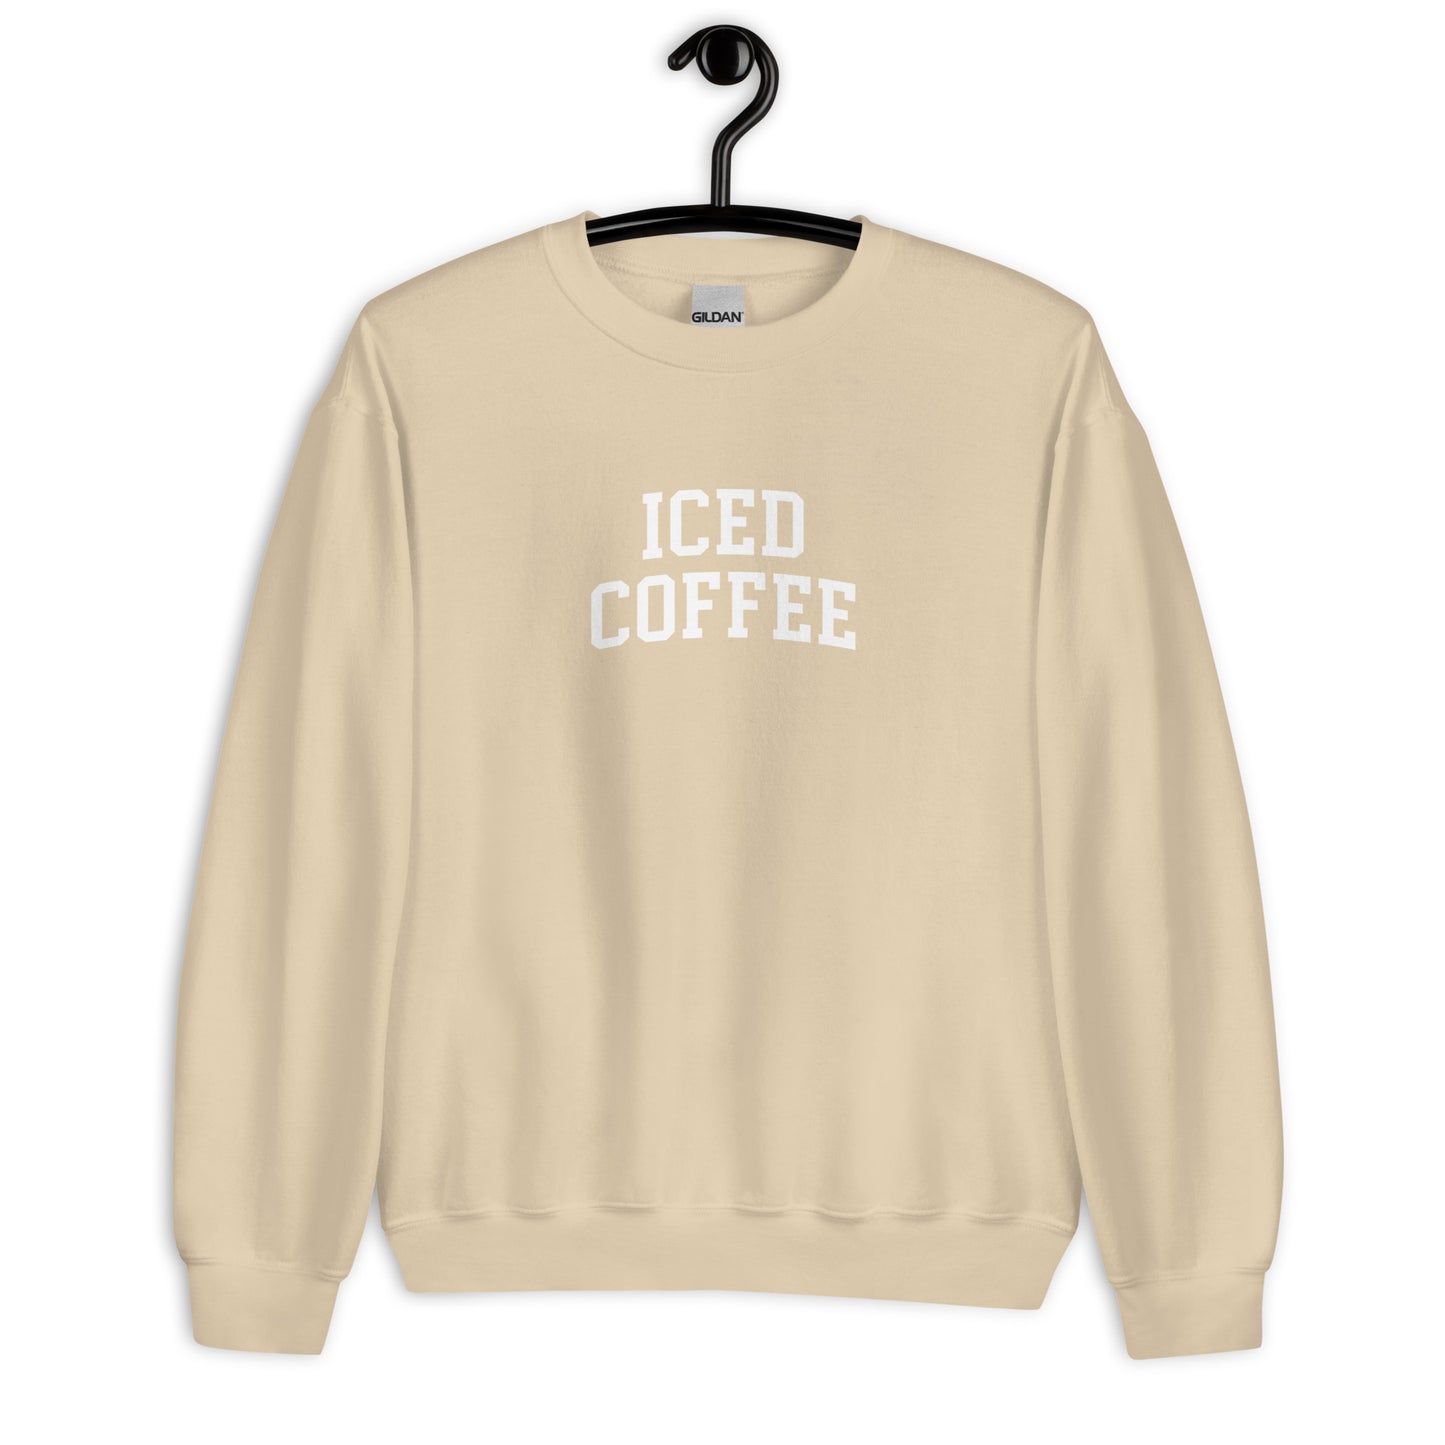 Iced Coffee Sweatshirt - Arched Font